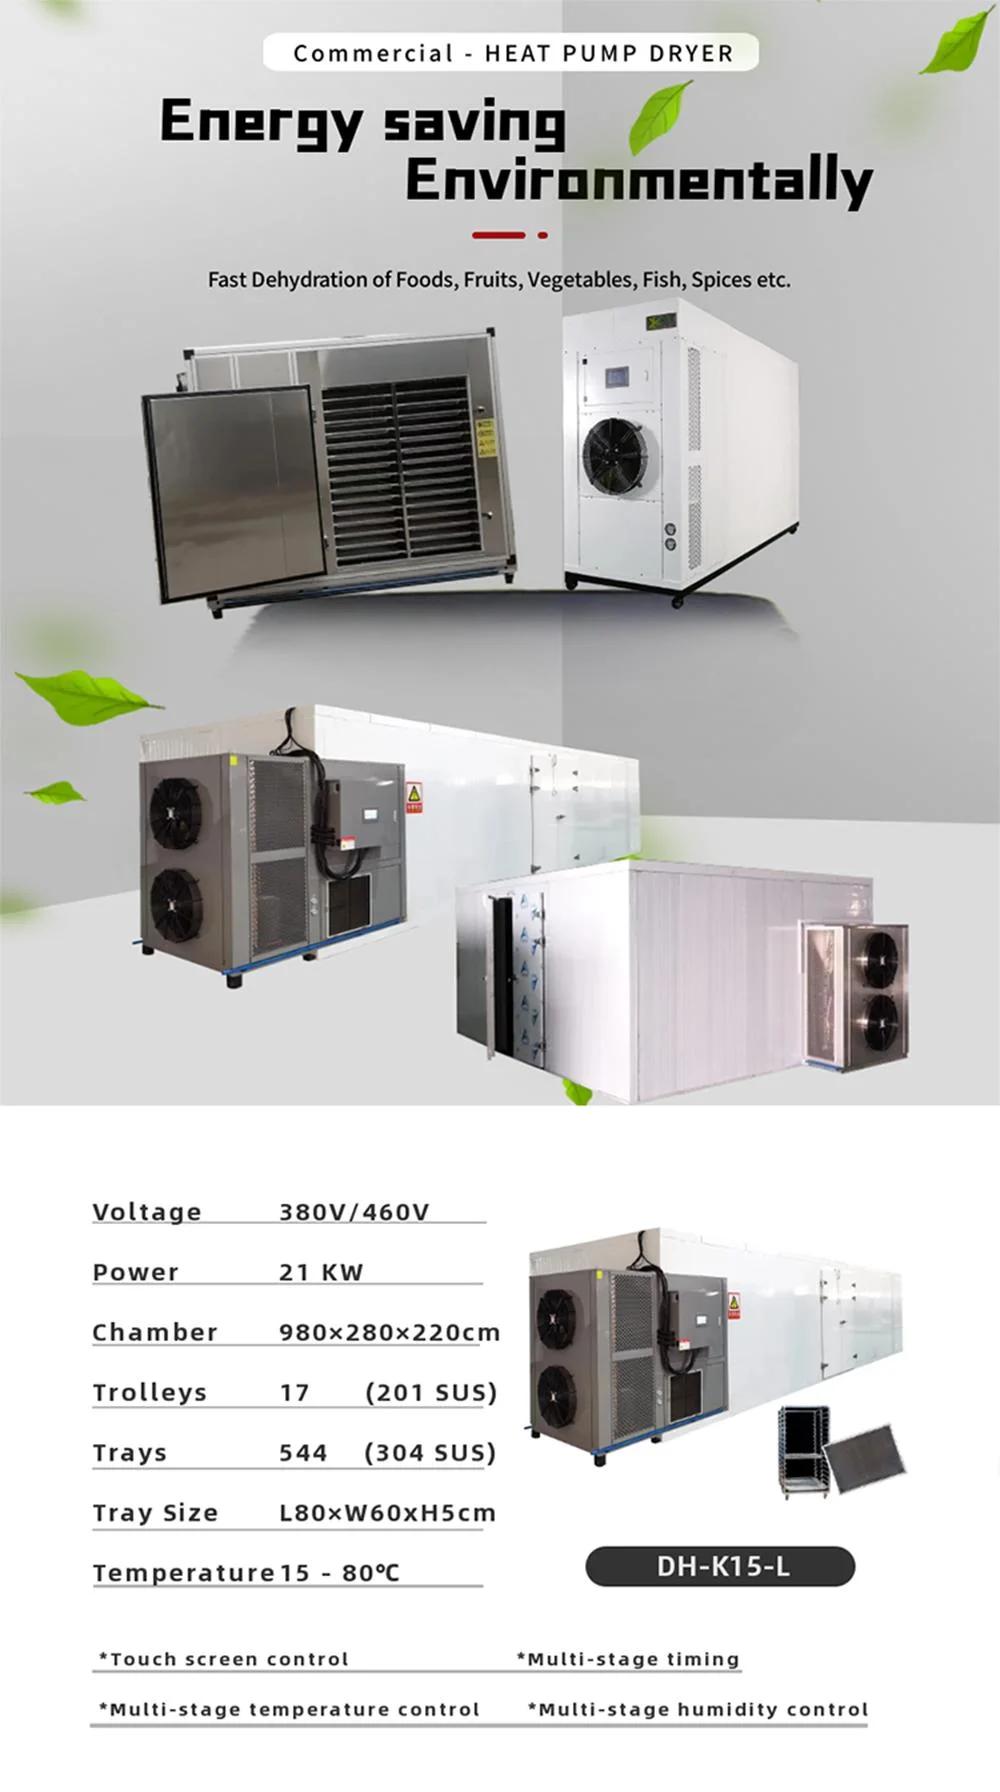 Hot Sale Ultra-High Capacity Heat Pump Dryer for Dehydrating Fruit,Vegetable, Fish,Spice,Noodles [Commercial Drying Machine, Drying Equipment, Dehydrator, Oven]